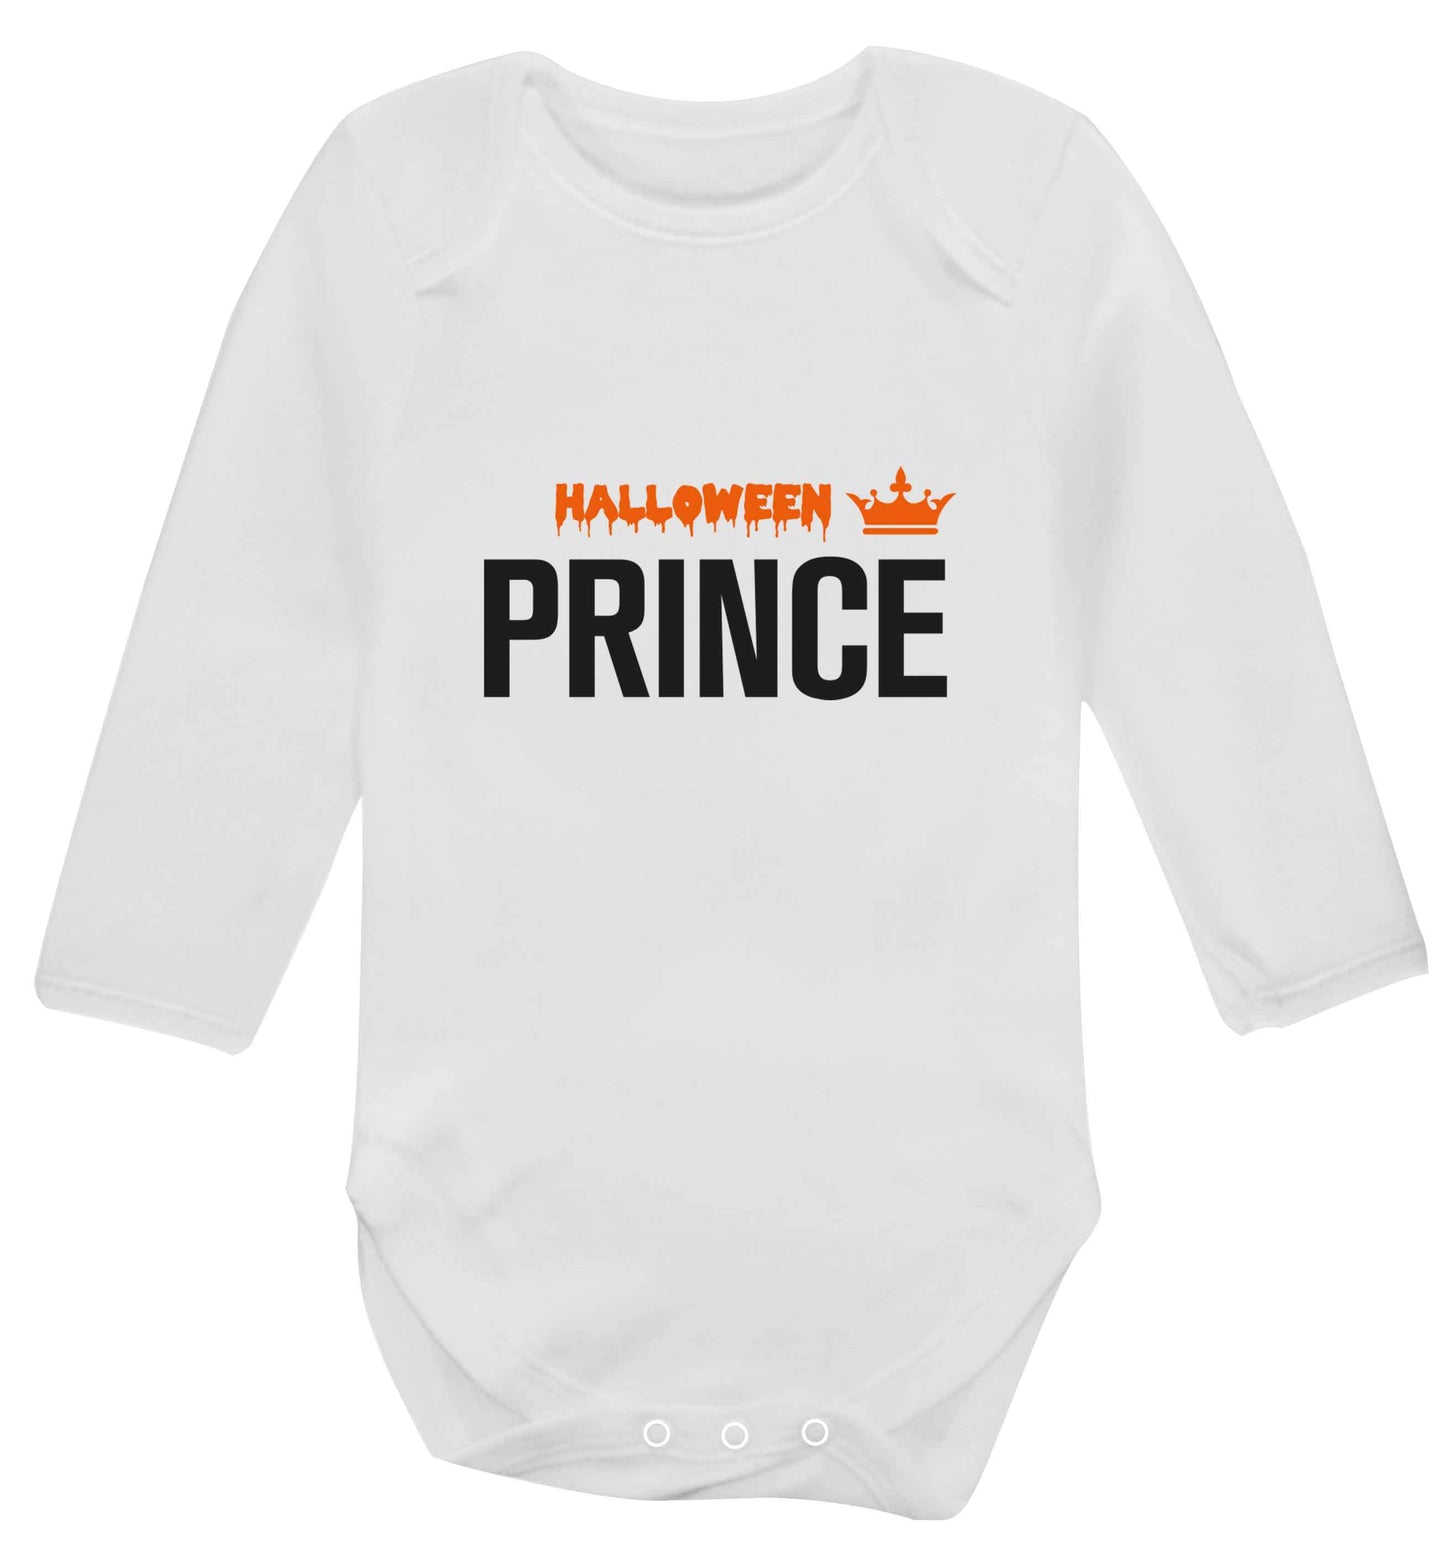 Halloween prince baby vest long sleeved white 6-12 months